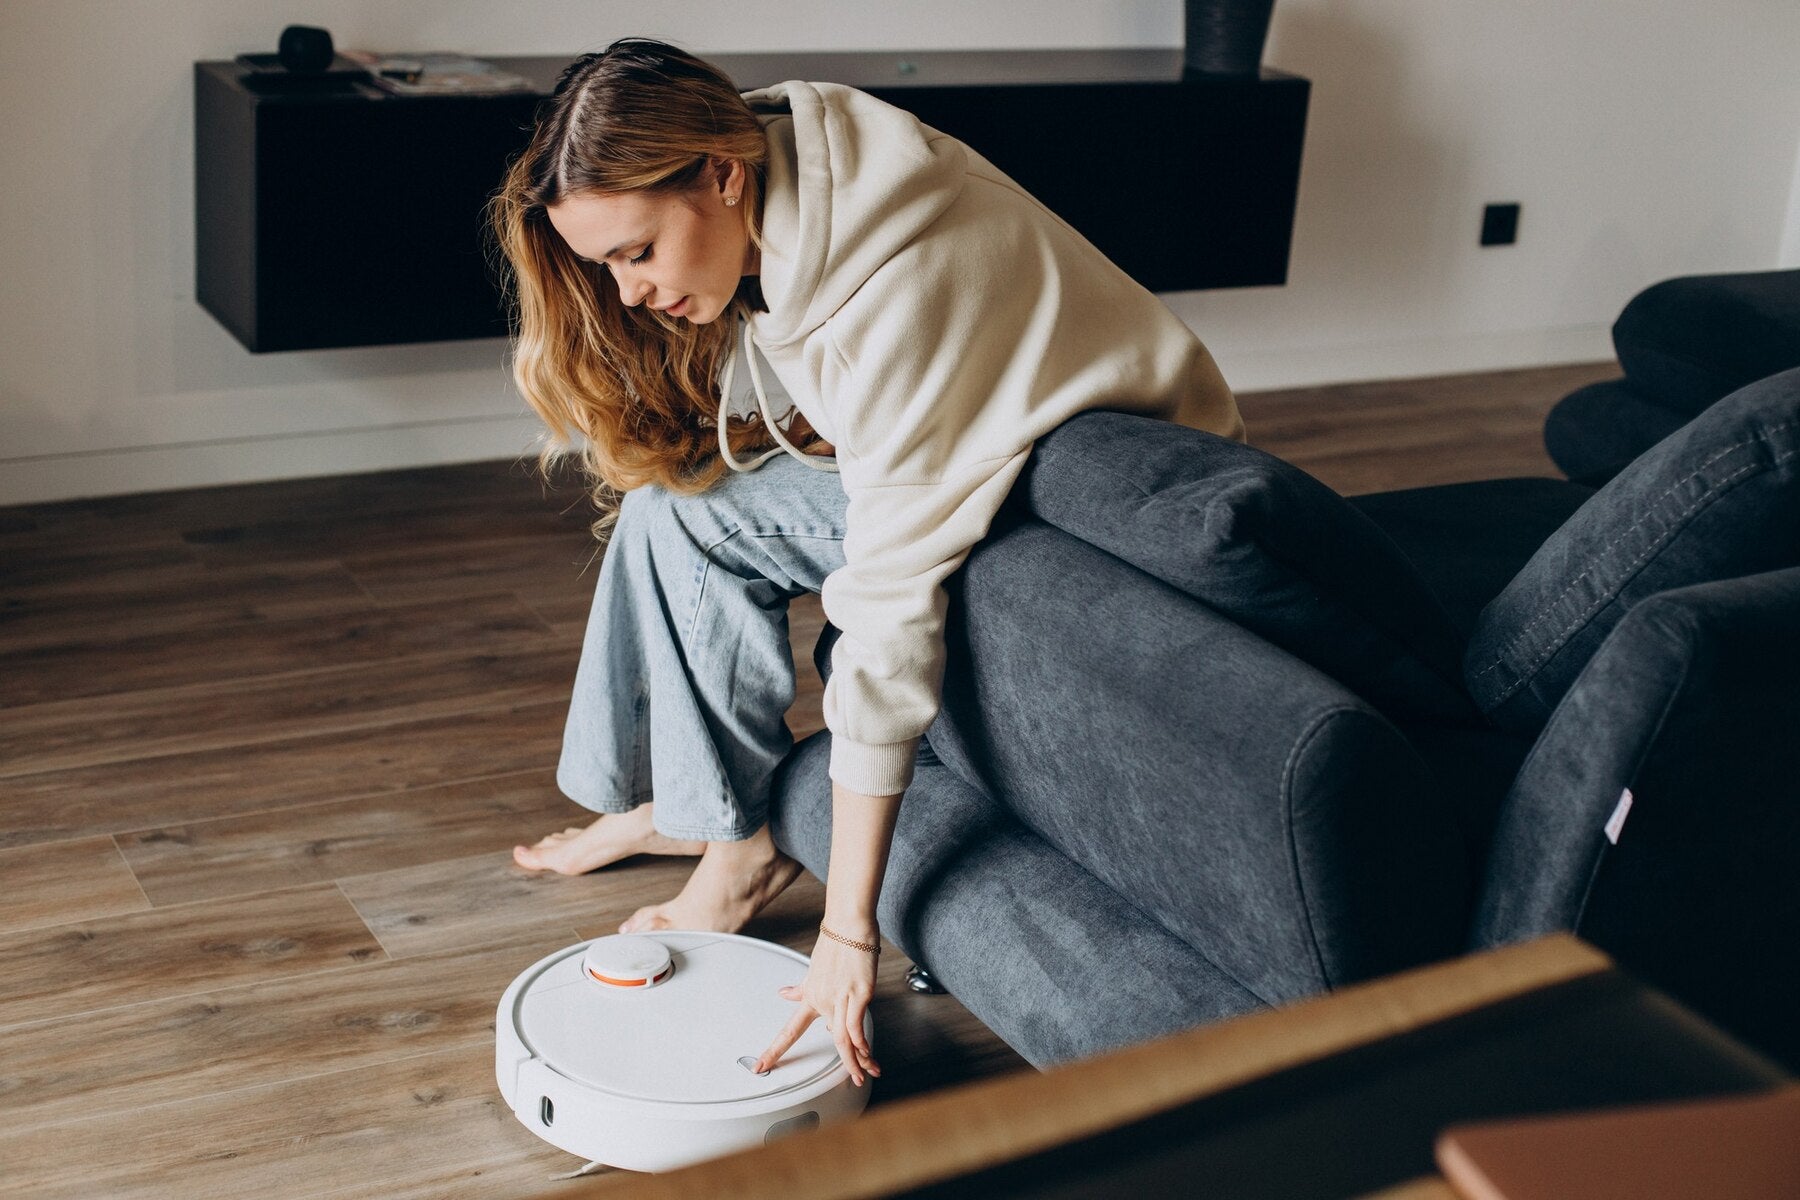 The Difference of Laser Robotic Vacuum Cleaner and Suction Vacuum Cleaner